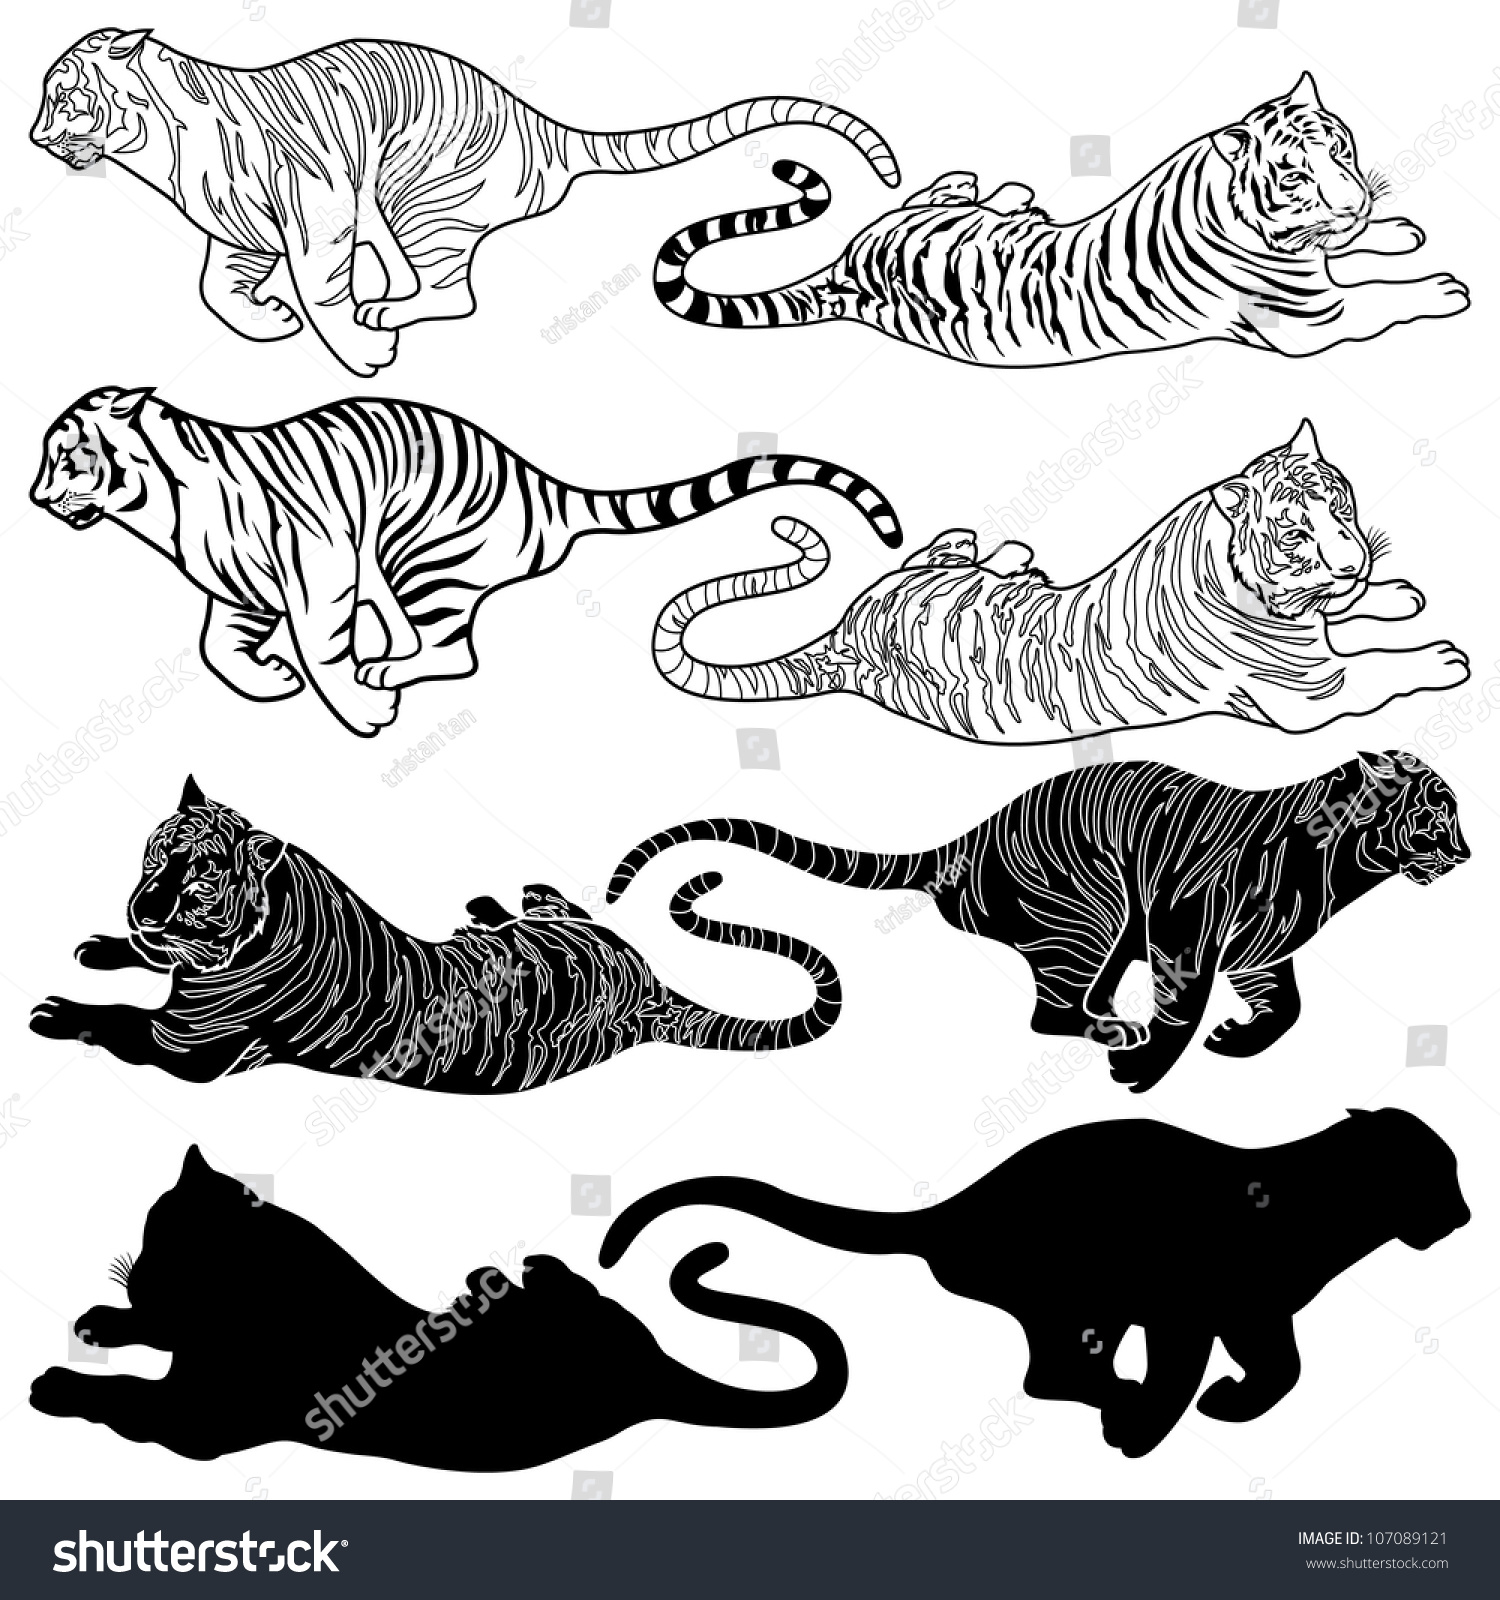 Vector Illustration Of Tiger Silhouettes And Design Set 107089121 Shutterstock 